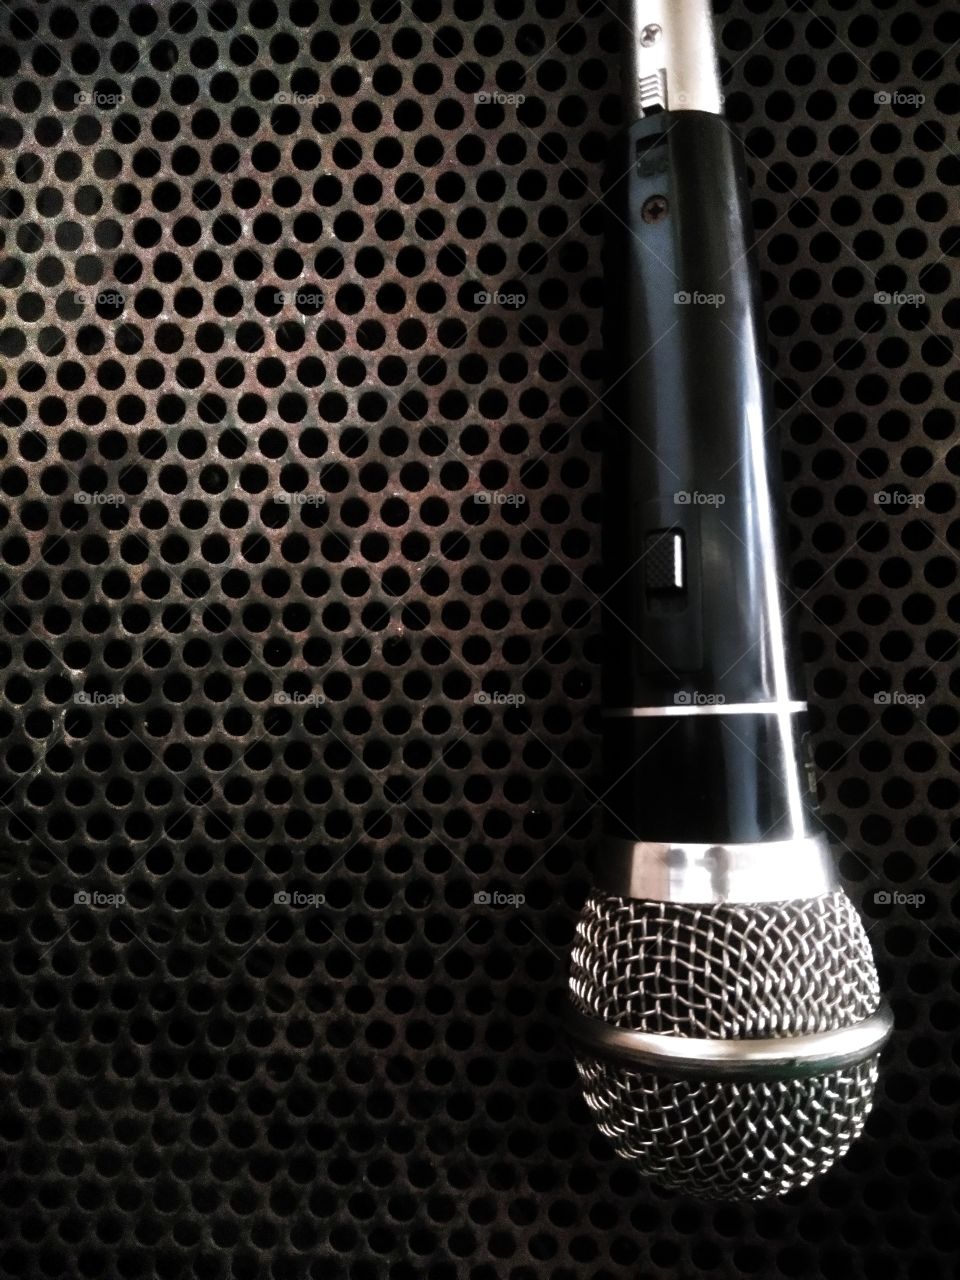 the microphone